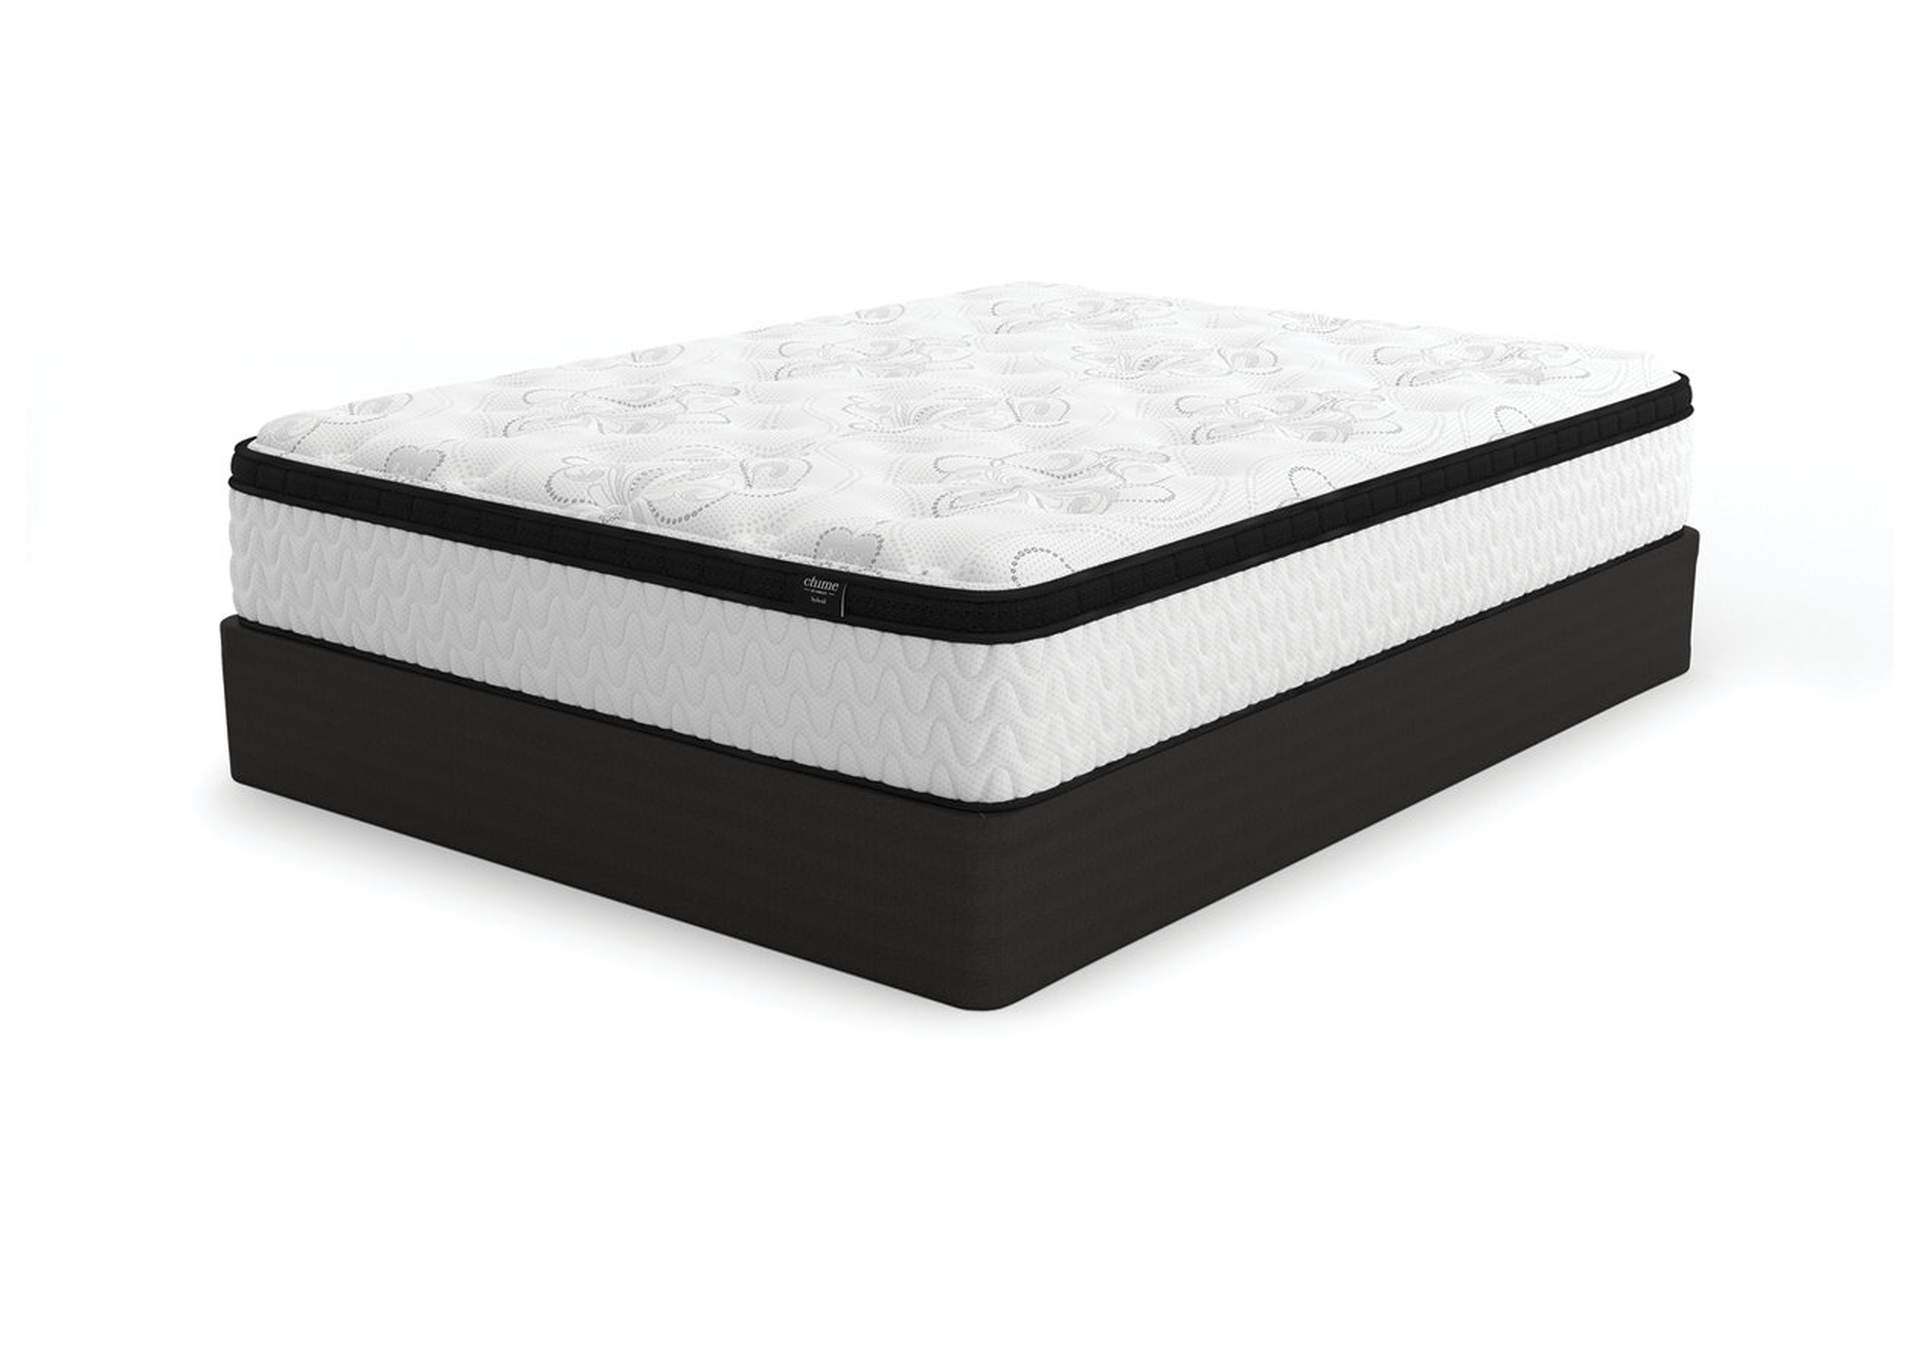 Chime 12 Inch Hybrid California King Mattress in a Box,Direct To Consumer Express